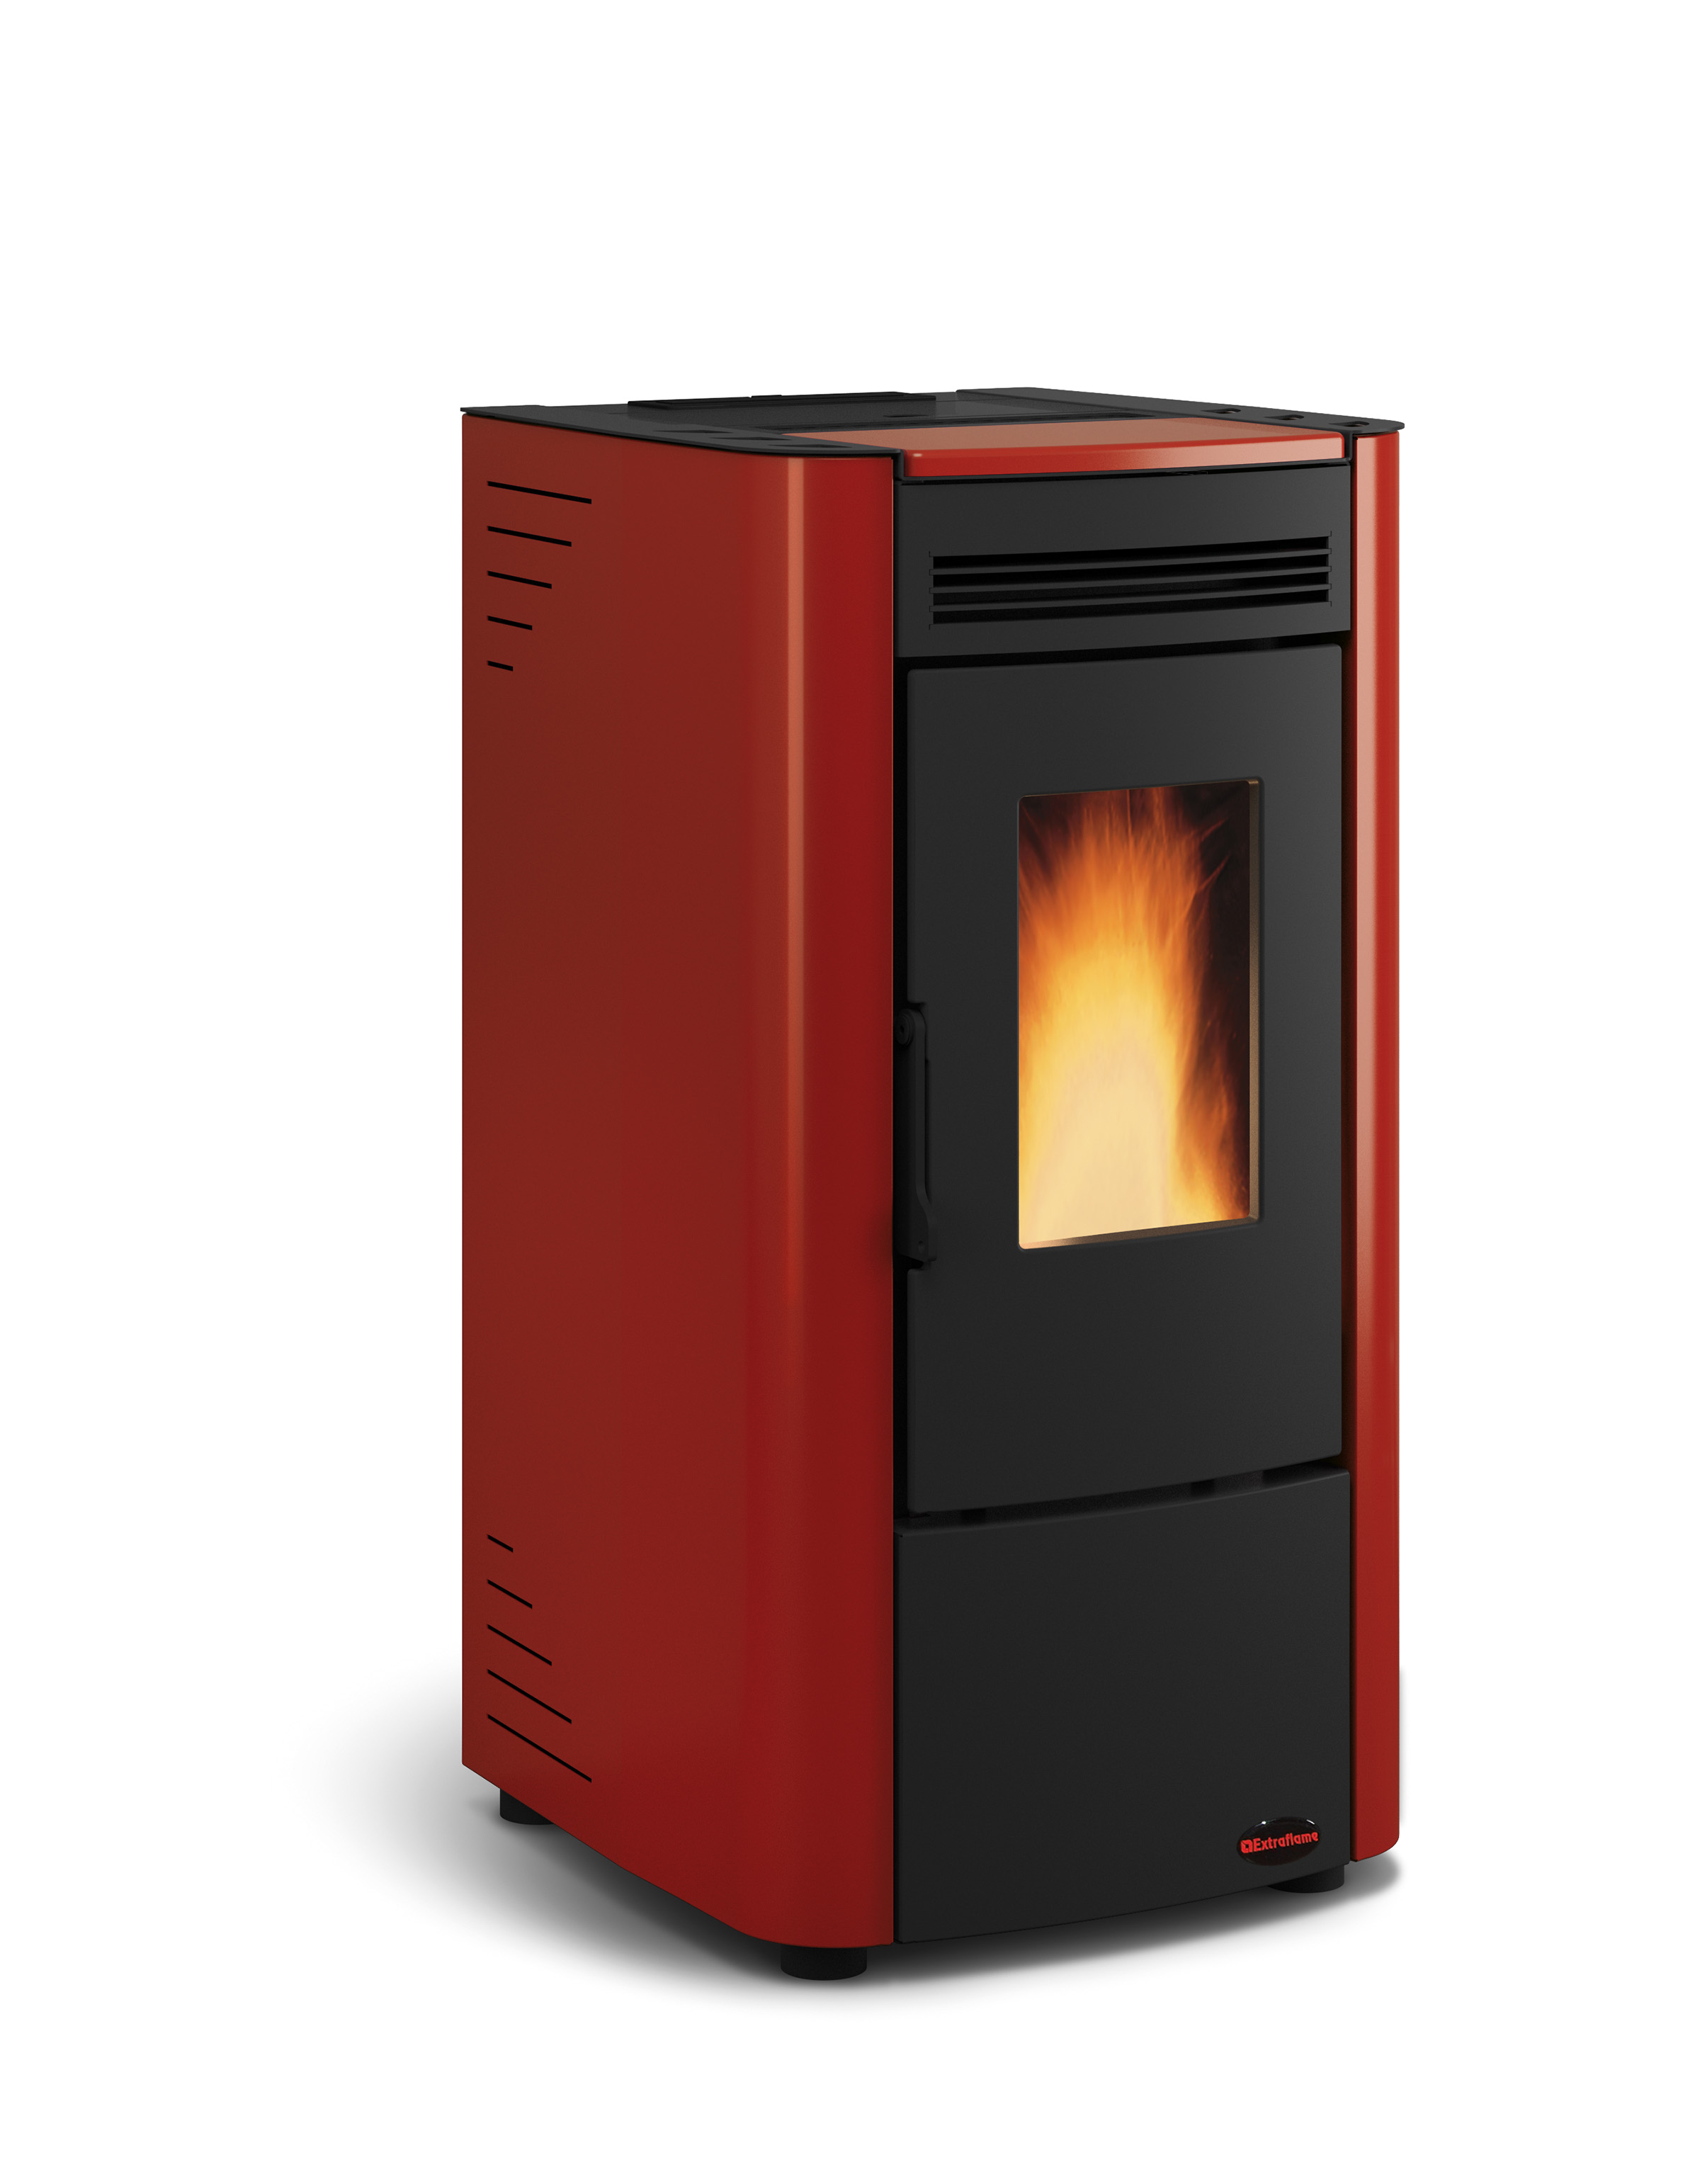 Ketty pellet stove Red